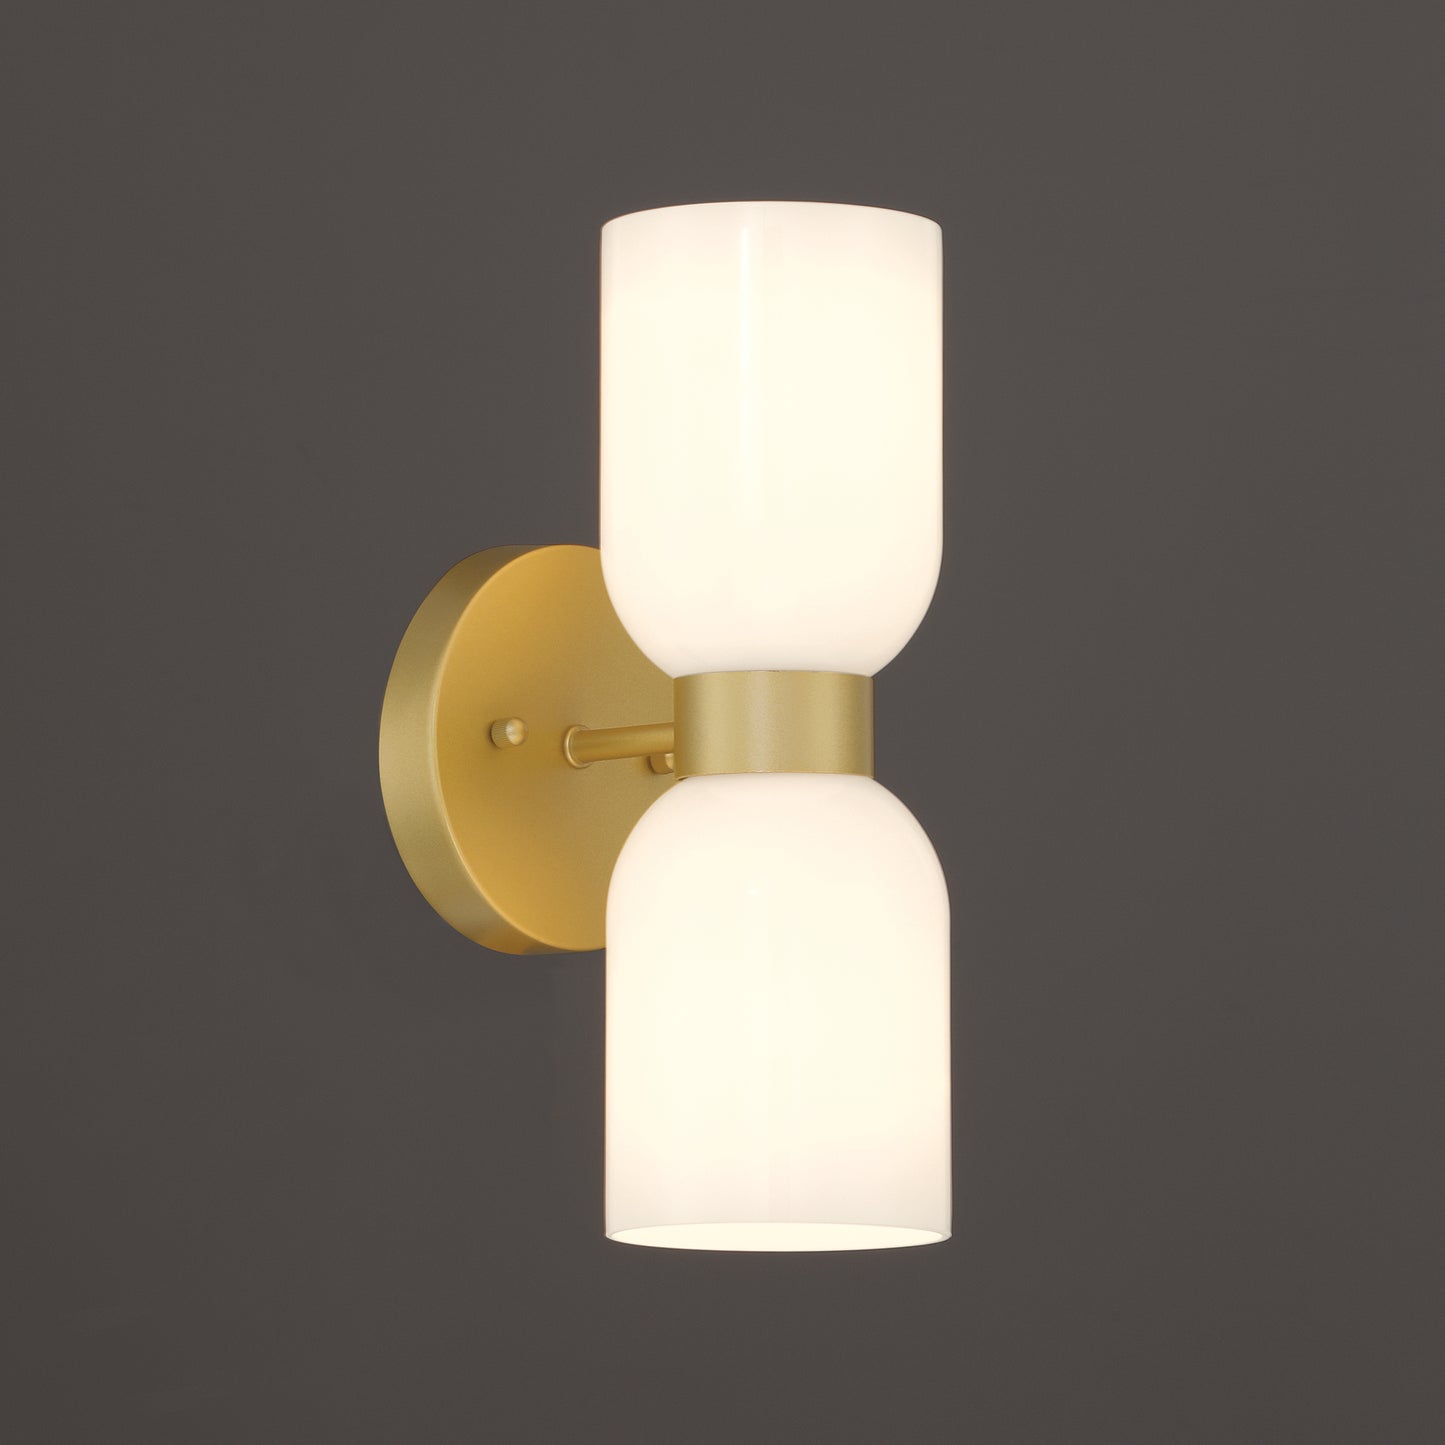 2 light milky glass wall sconce (9) by ACROMA